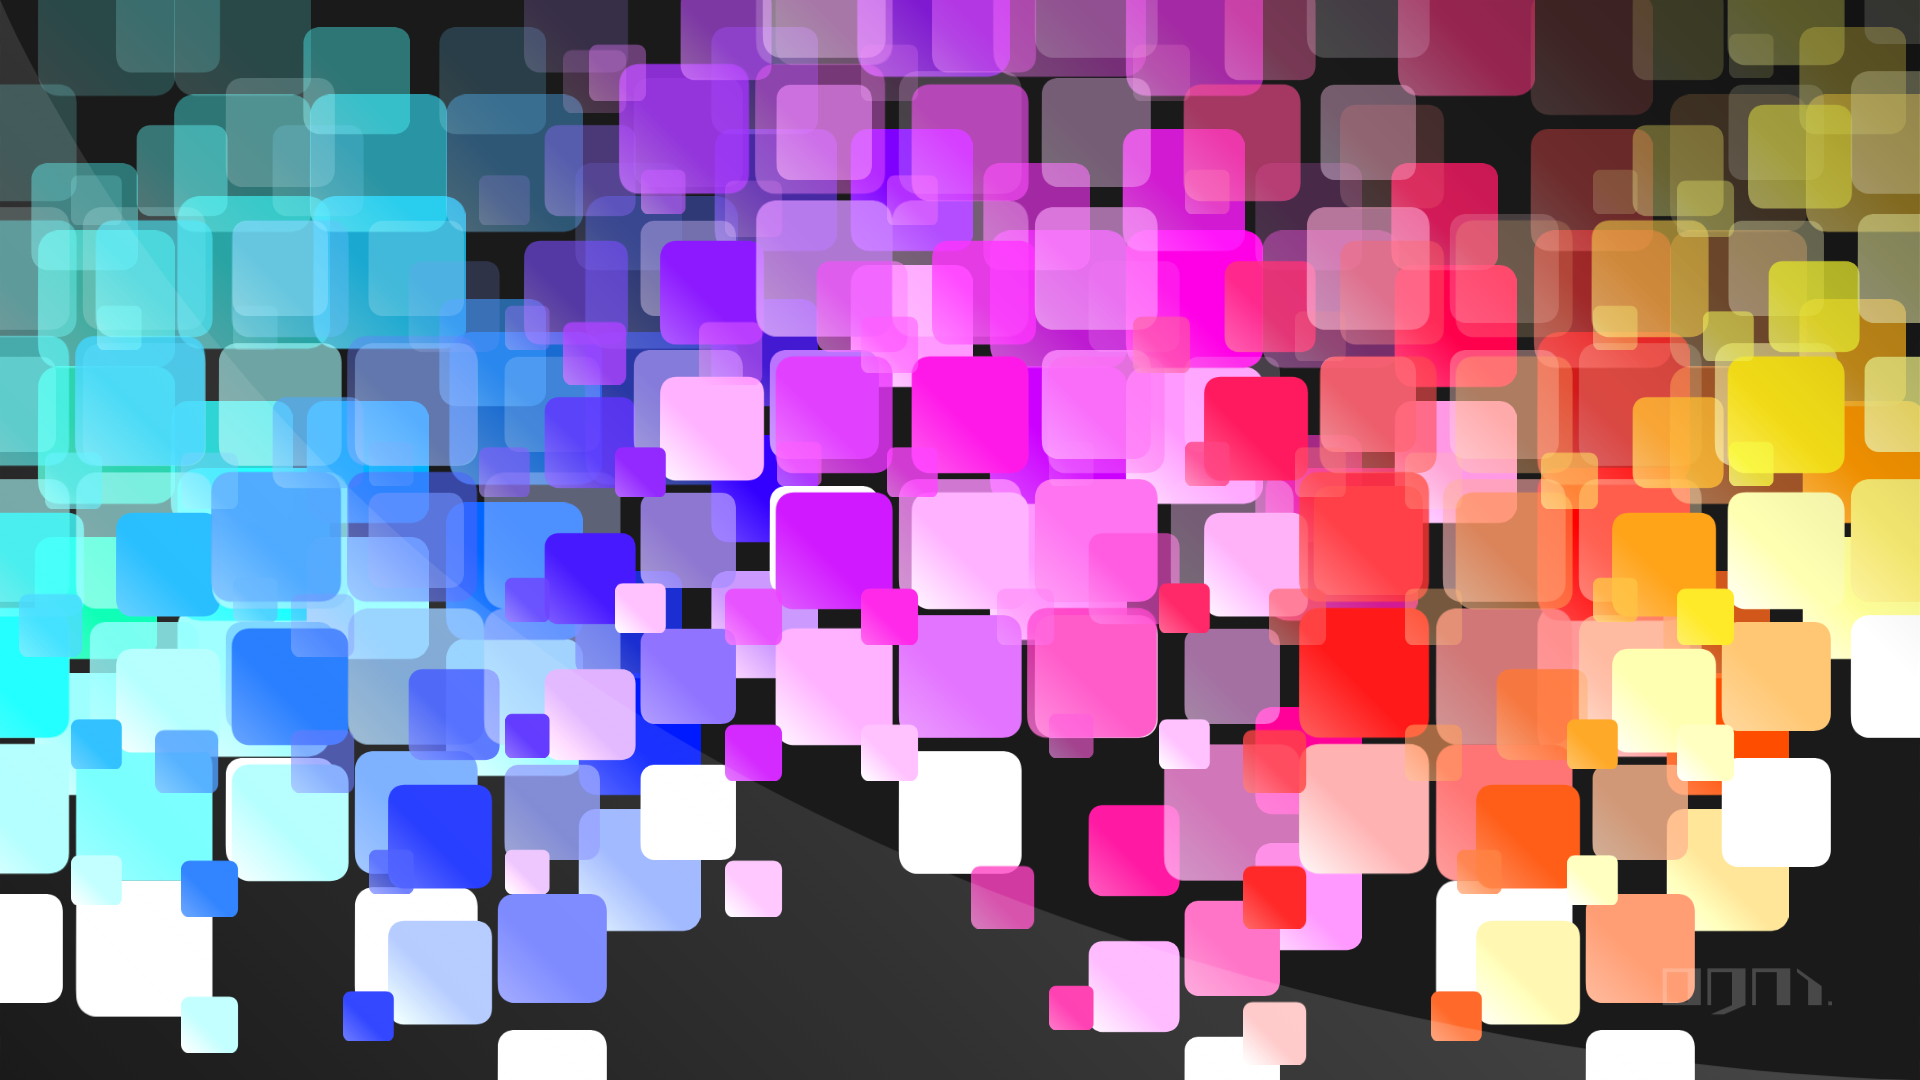 Abstract Square Bubbles Colorful Bright Minimalism Vector 1920x1080